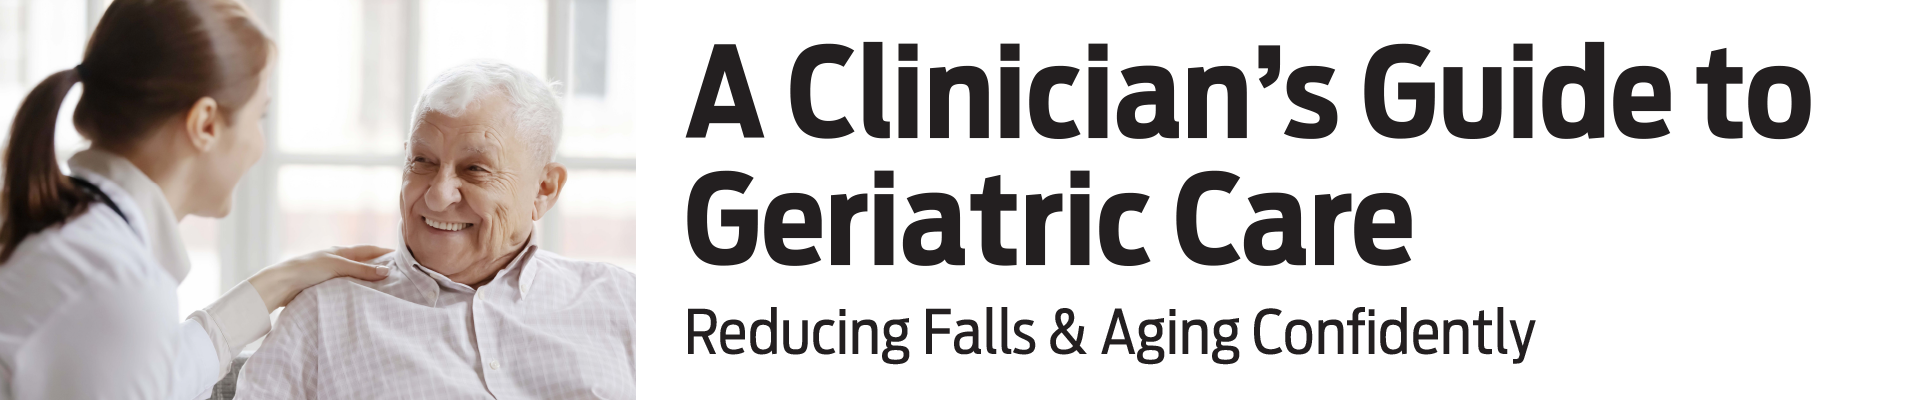 A Clinician’s Guide to Geriatric Care: Reducing Falls & Aging Confidently